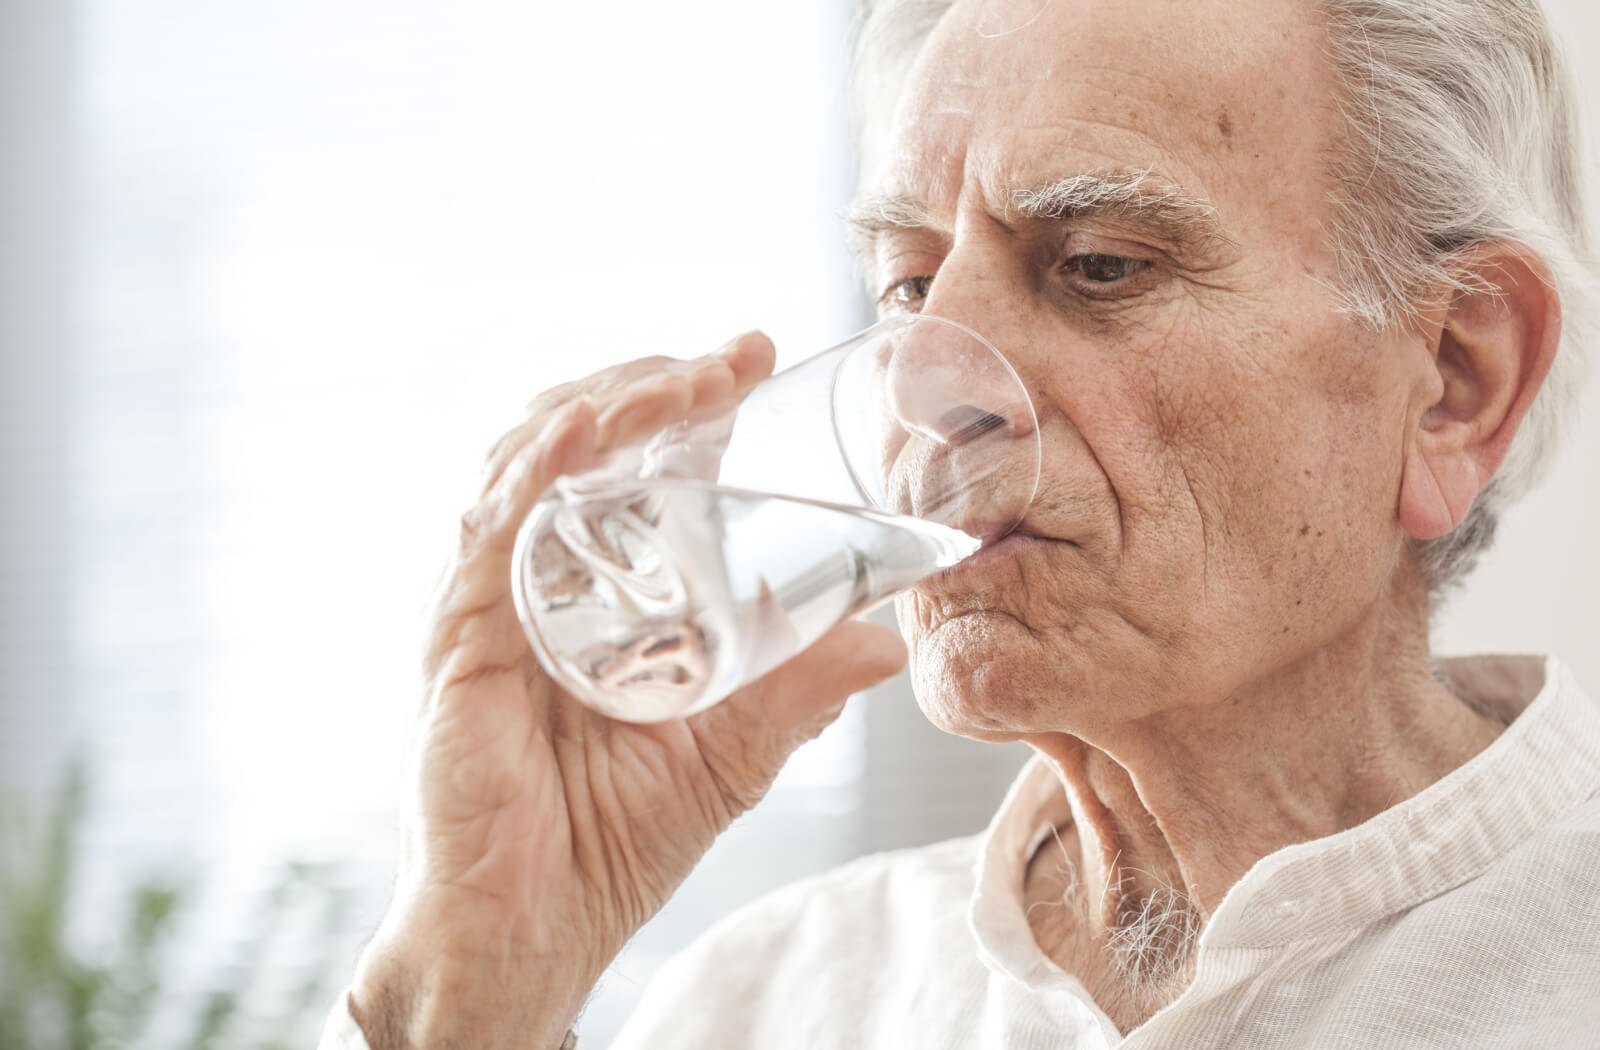 A close-up of a senior drinking a glass of water.